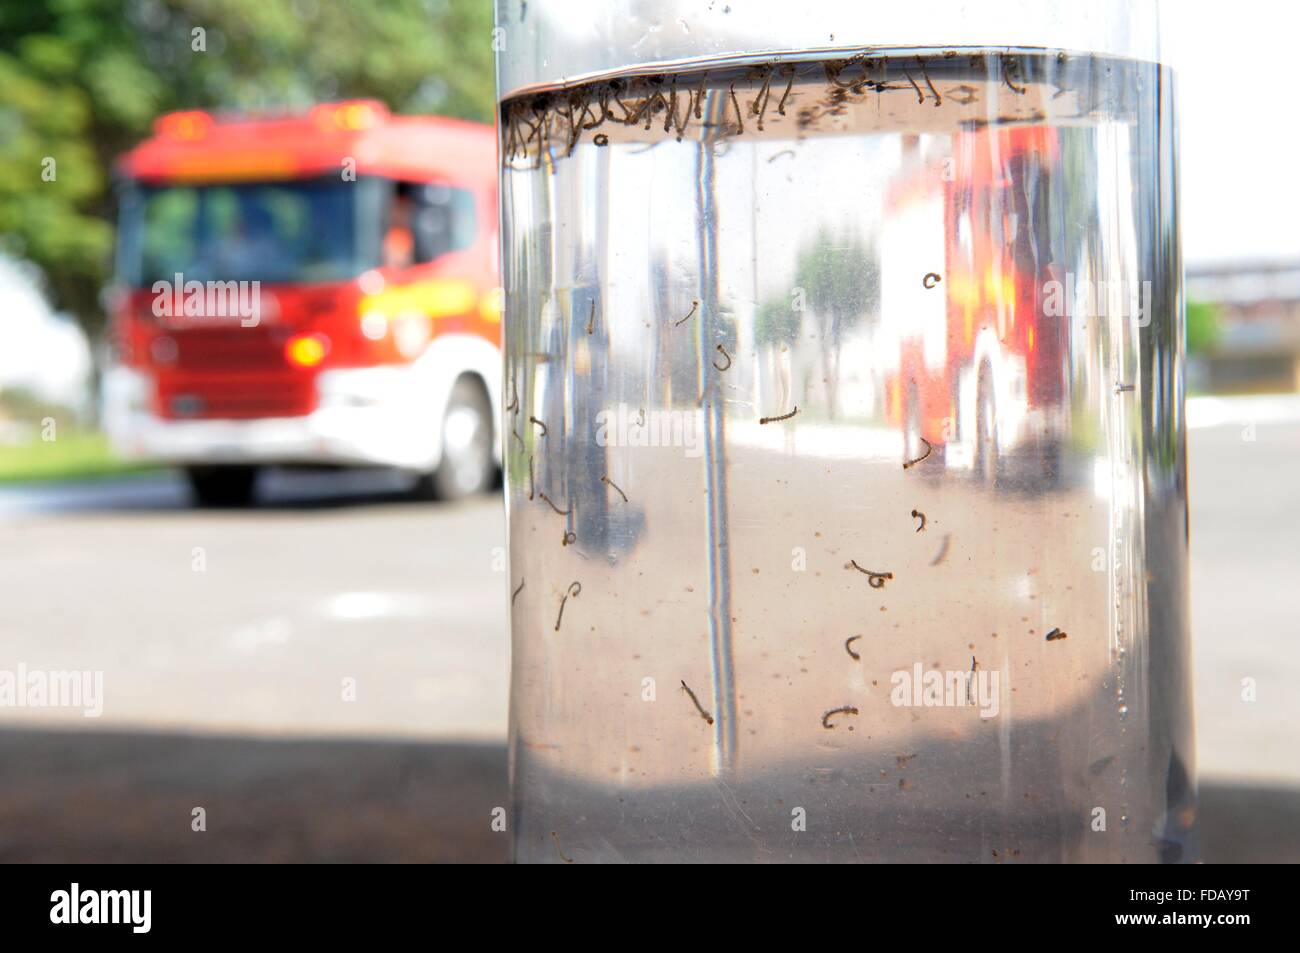 A Aedes Aegypti Mosquito Larvae In A Glass Container During Control